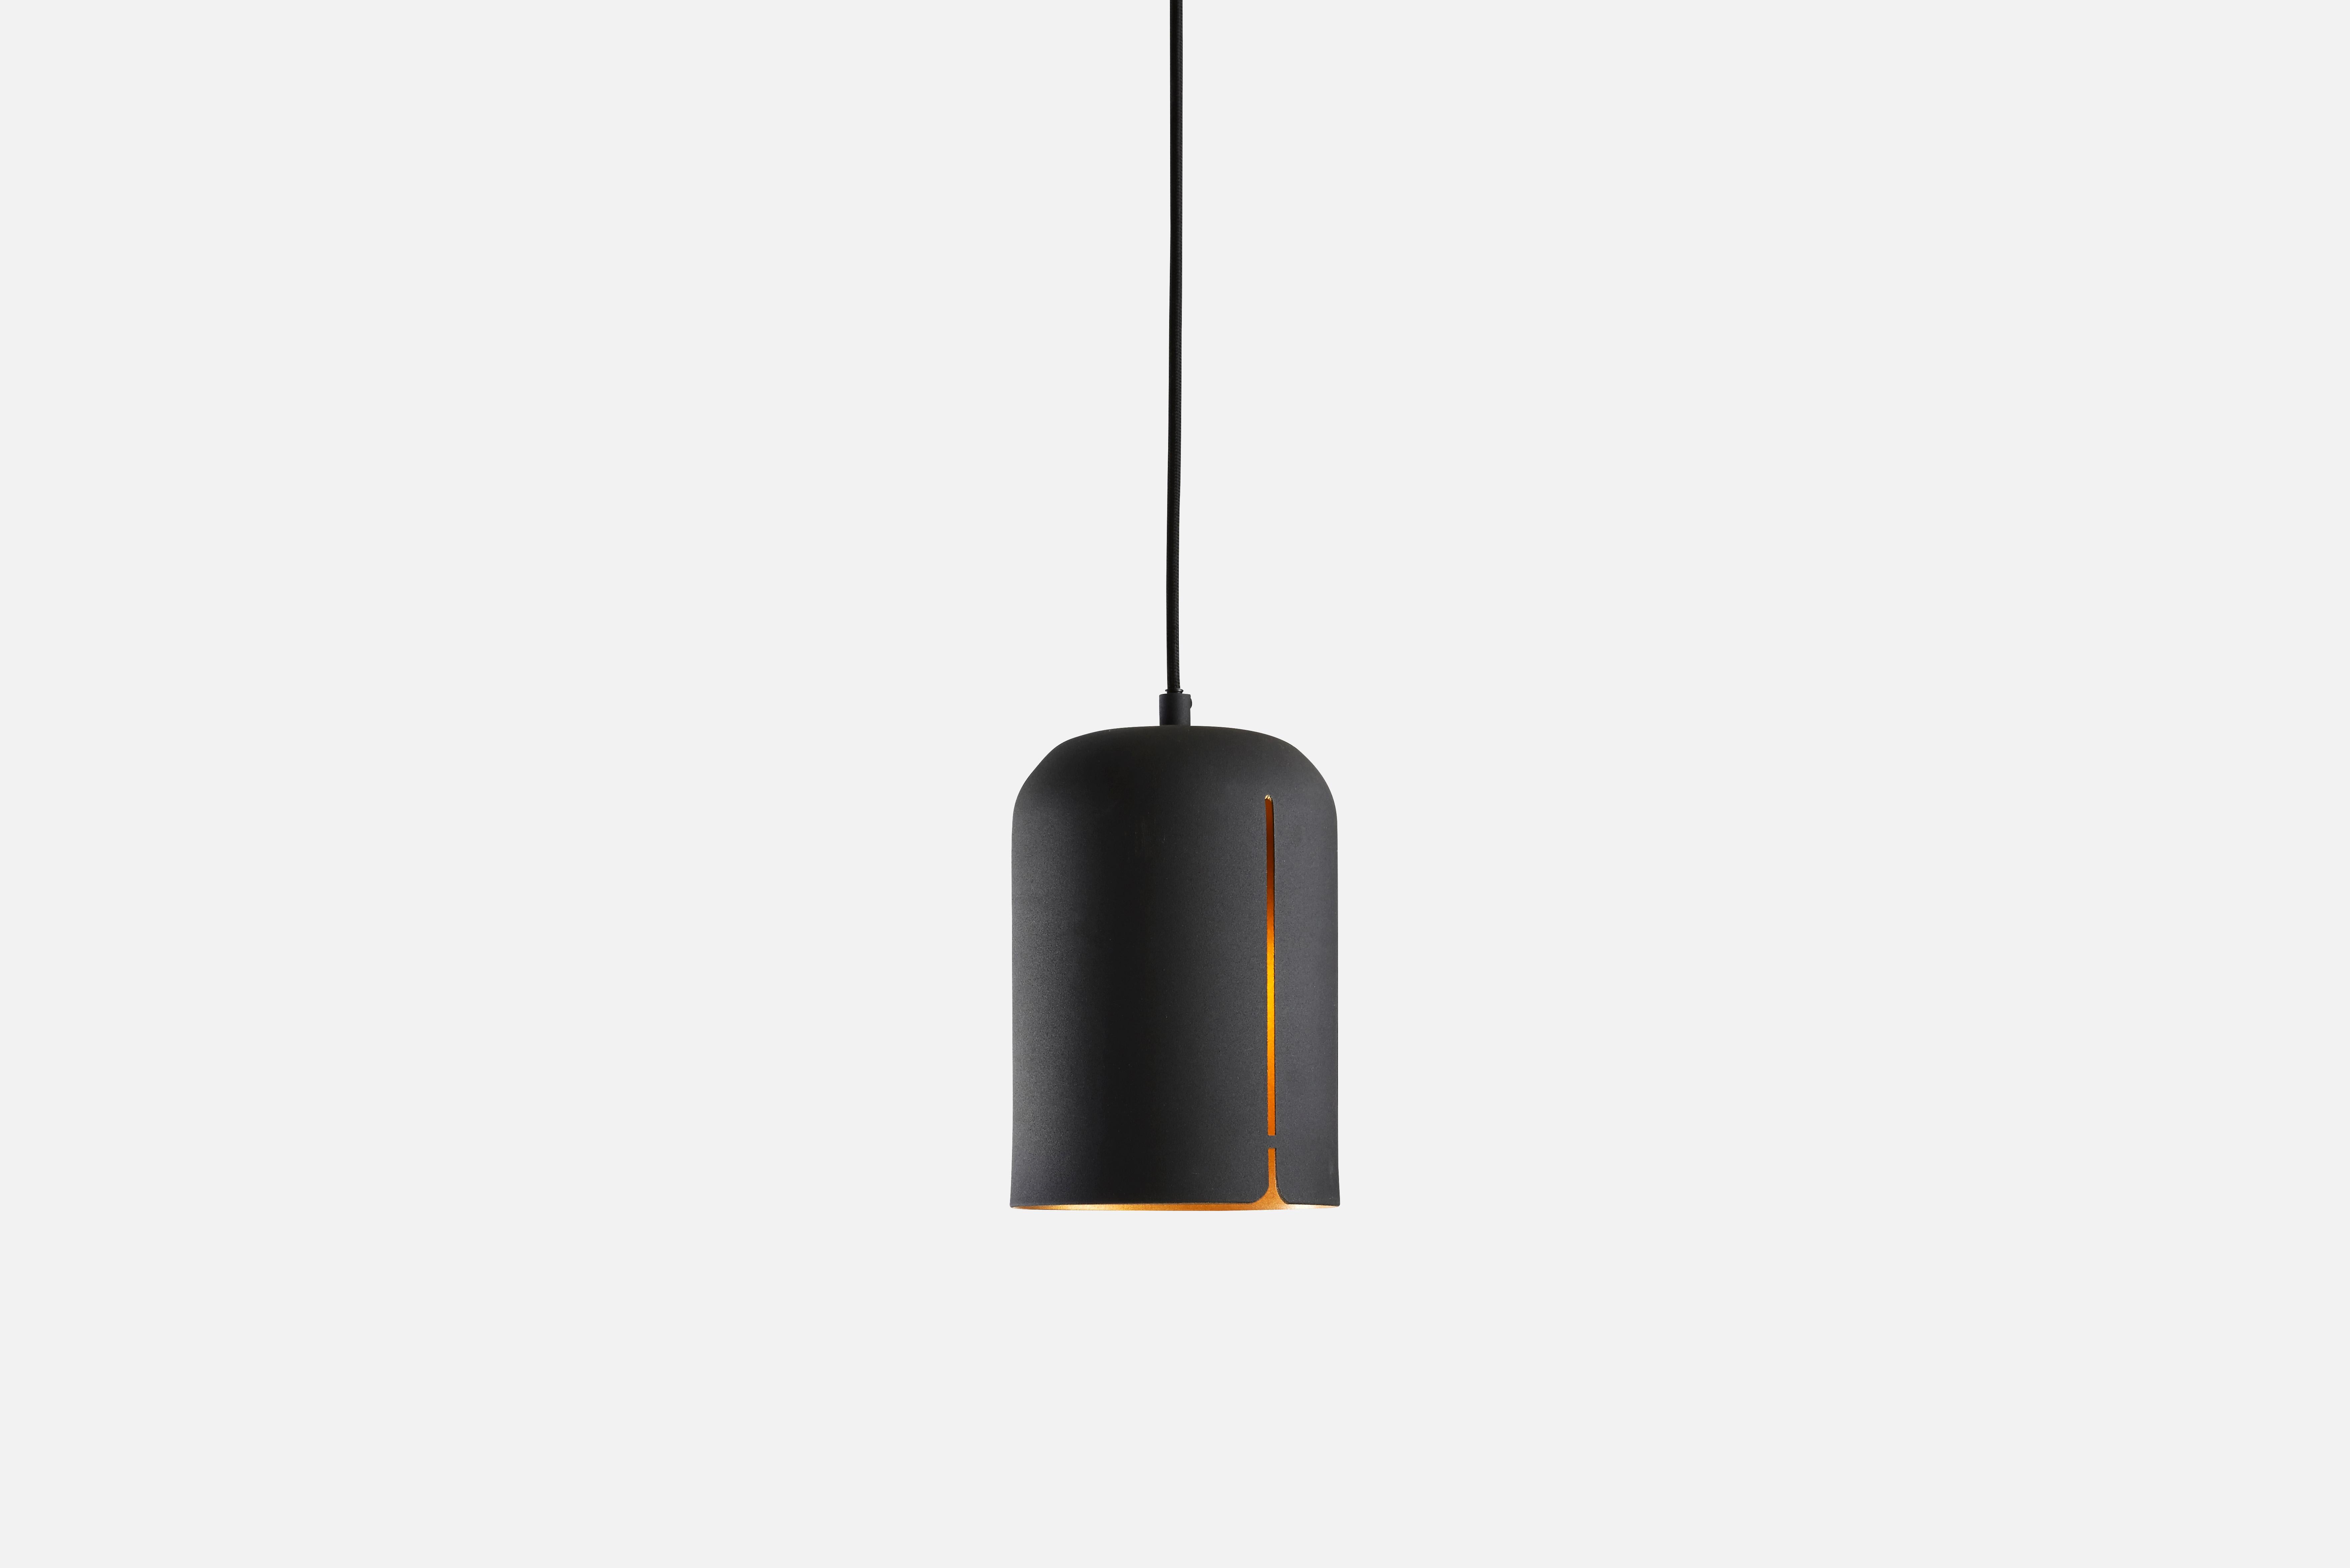 Short Gap pendant lamp by Nur Design.
Materials: metal.
Dimensions: D 14 x H 20 cm.

NUR design is a Danish design studio focusing on Nordic traditions with a strive to create classic and functional design. In German, the word NUR means ‘only’